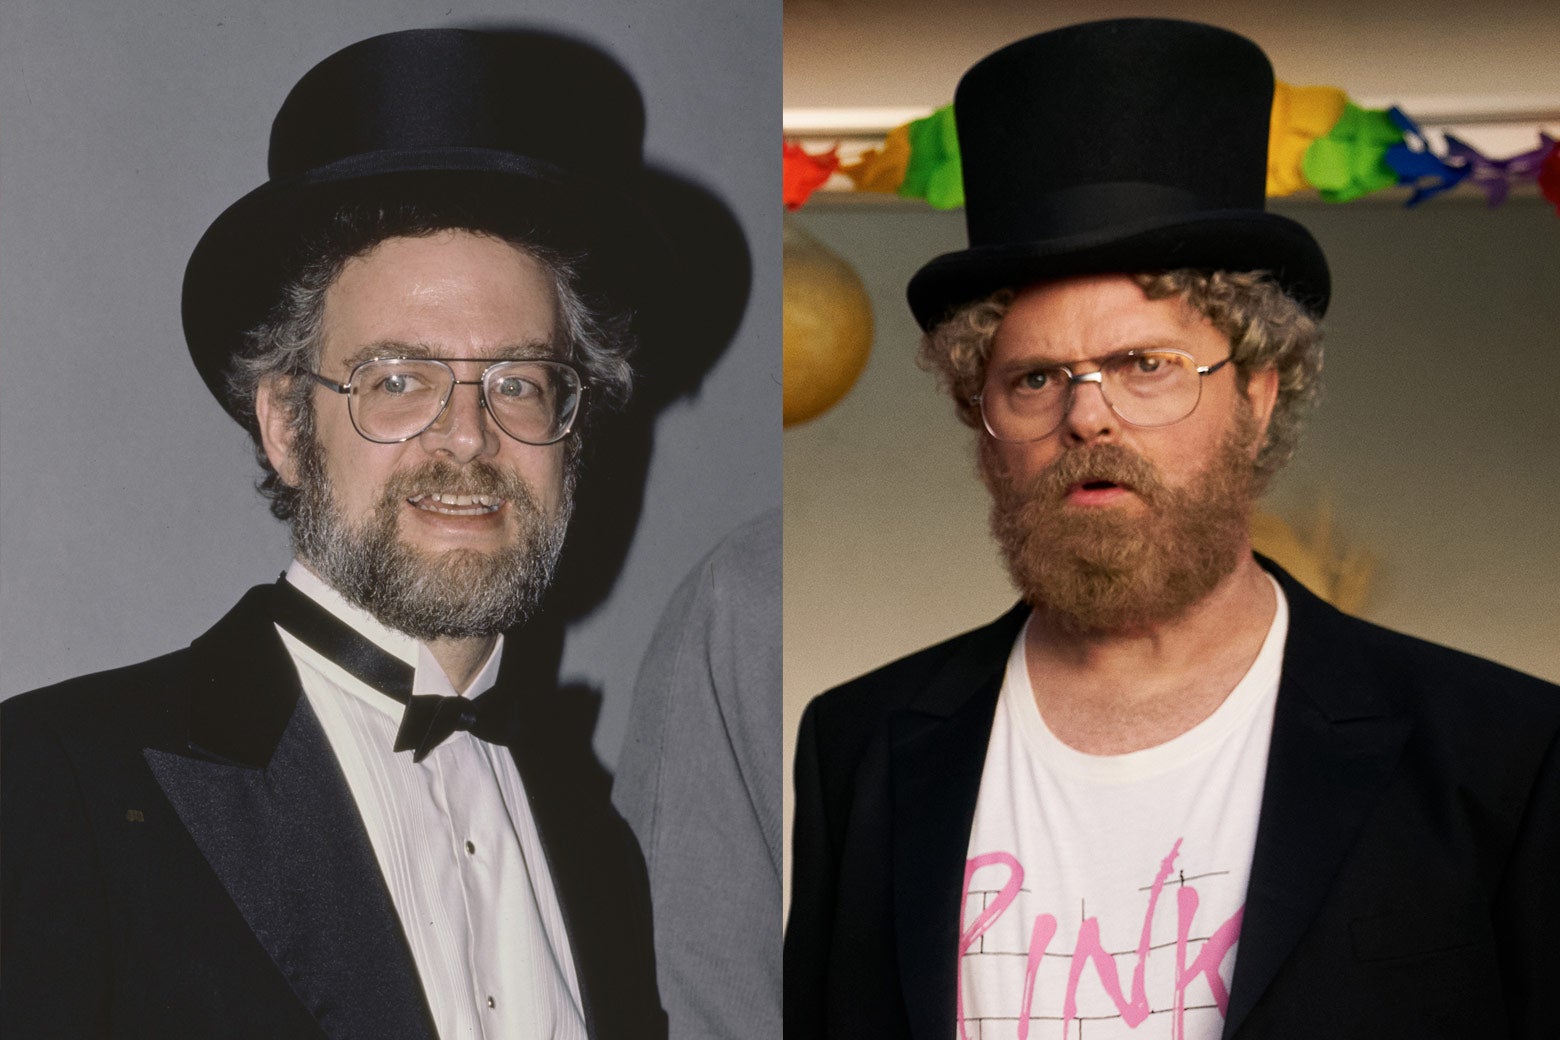 Both men wear top hats, sport large glasses, and have thick beards. Hansen wears a bow tie and dress shirt under his tuxedo jacket, whereas Wilson wears a shirt with the word "Pink" visible in the Pink Floyd font under his tuxedo jacket.